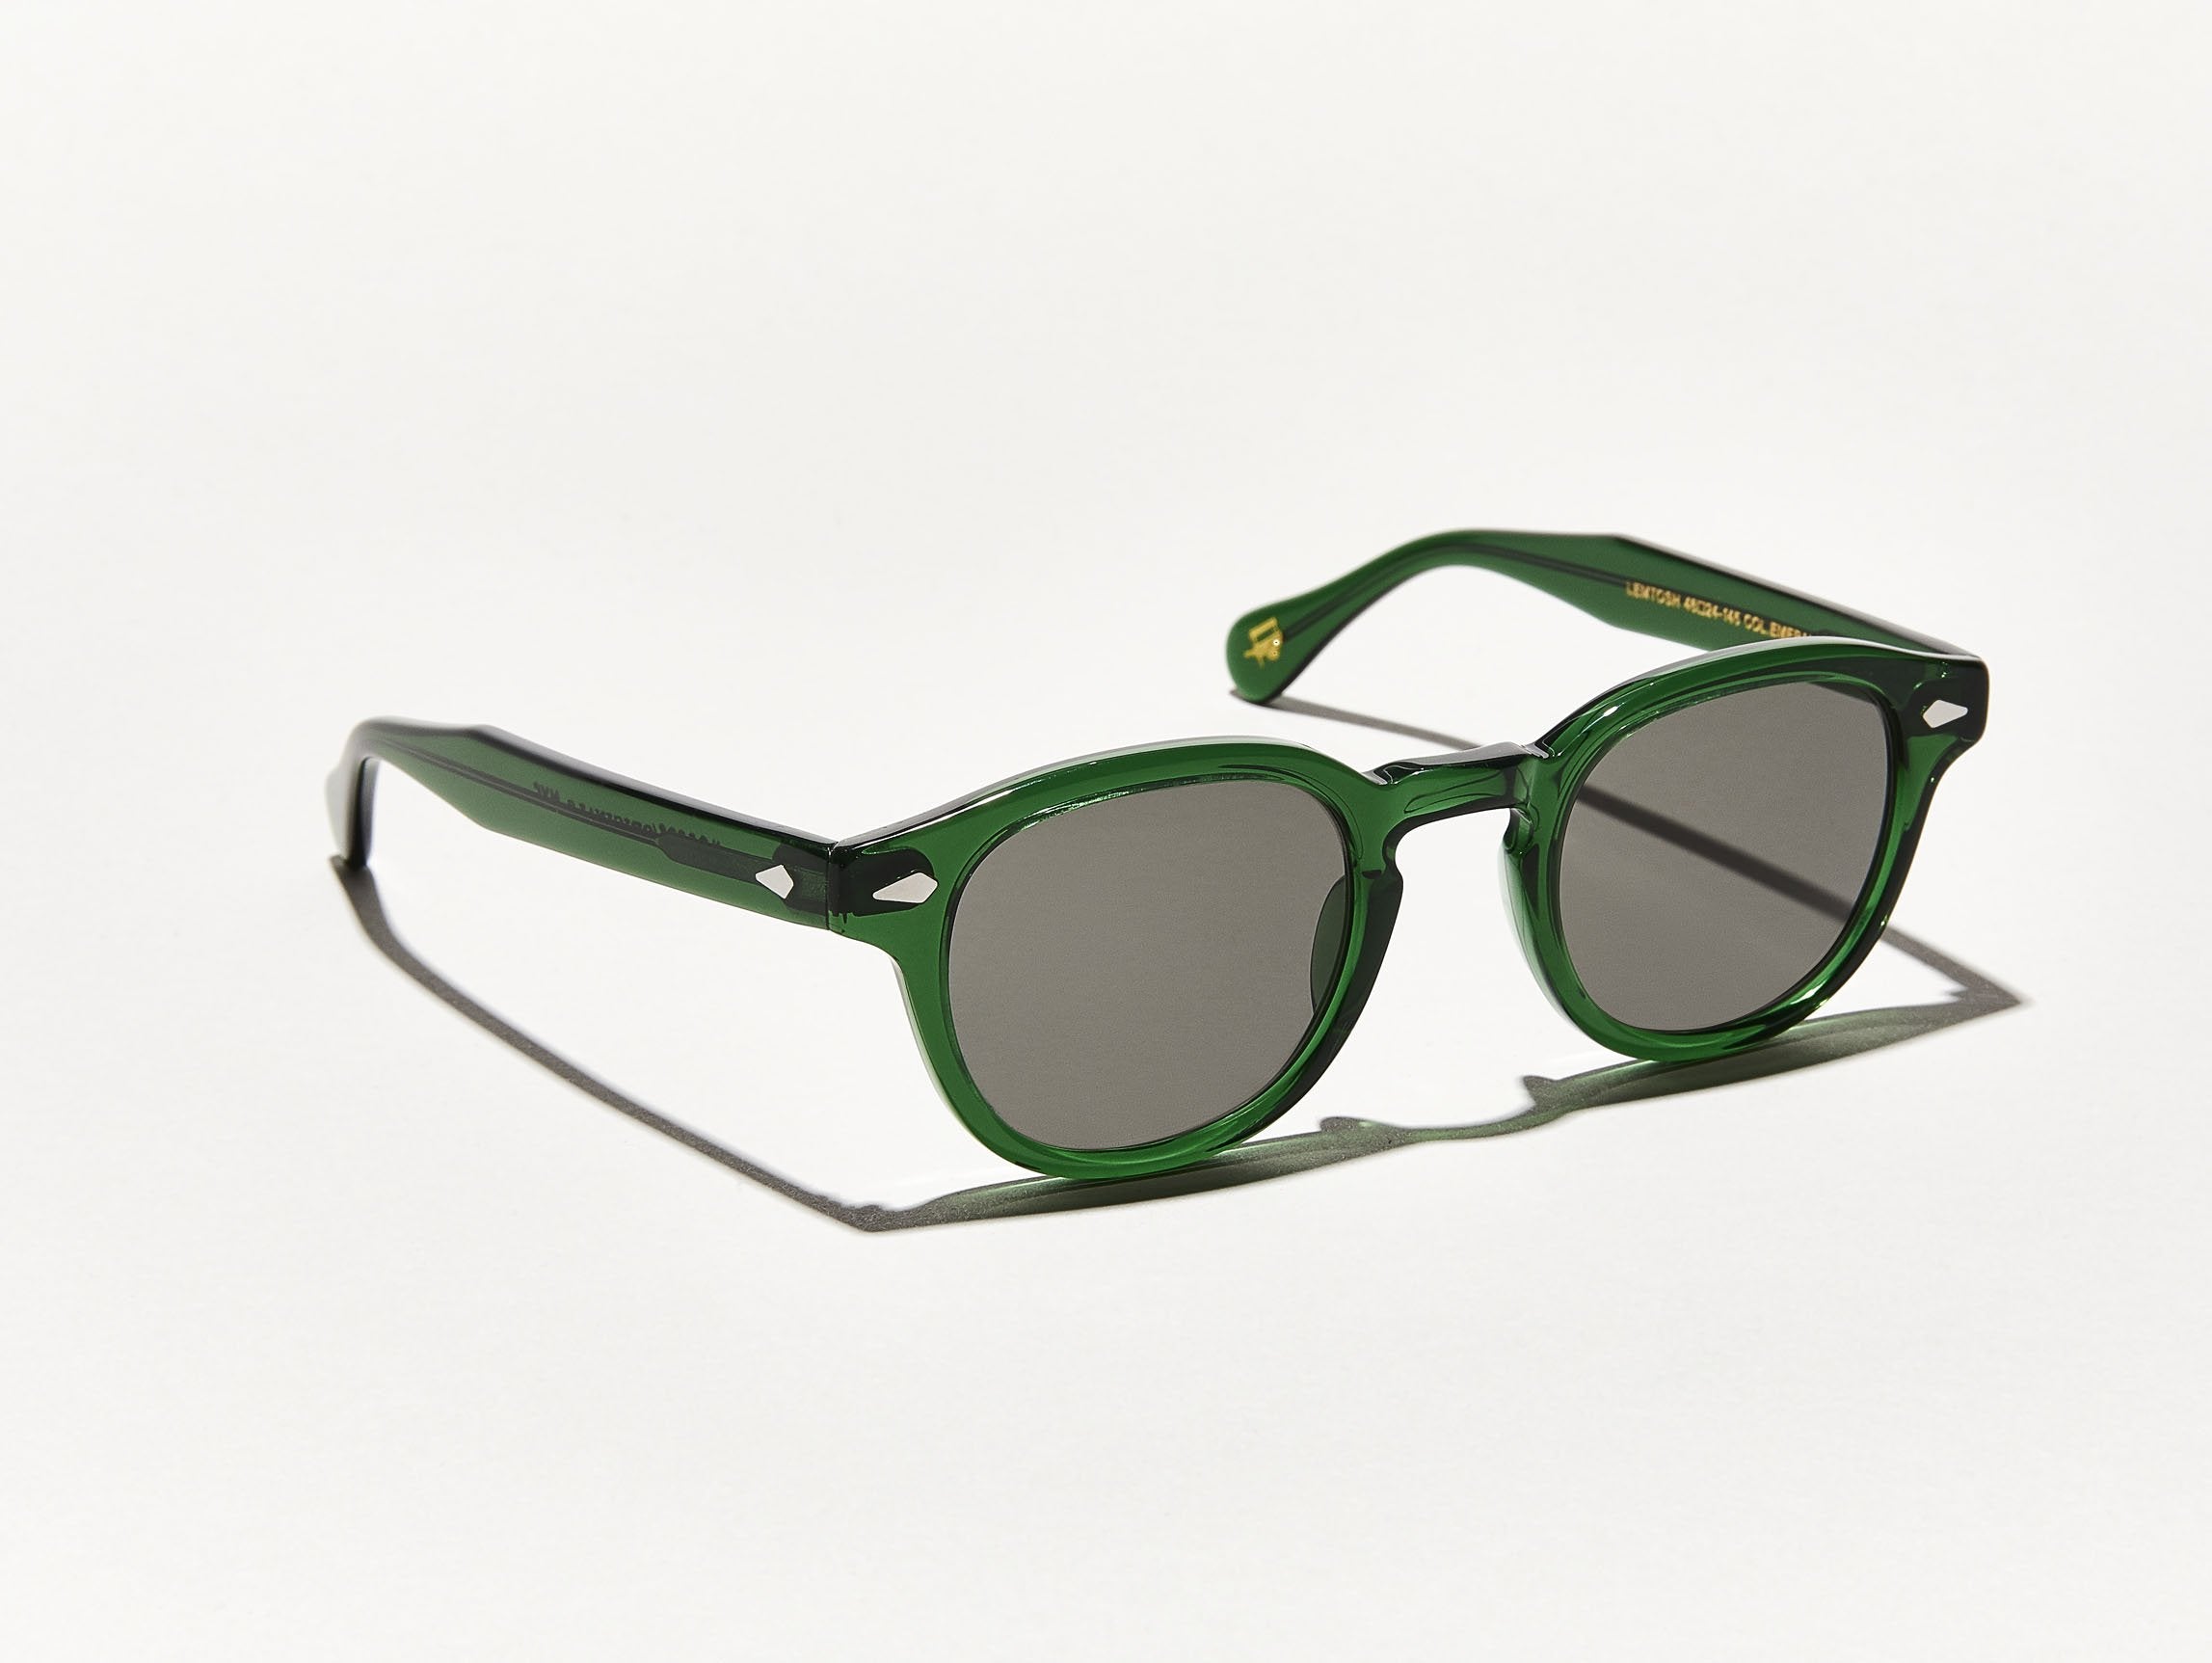 The LEMTOSH SUN in Emerald with Grey Polarized Lenses